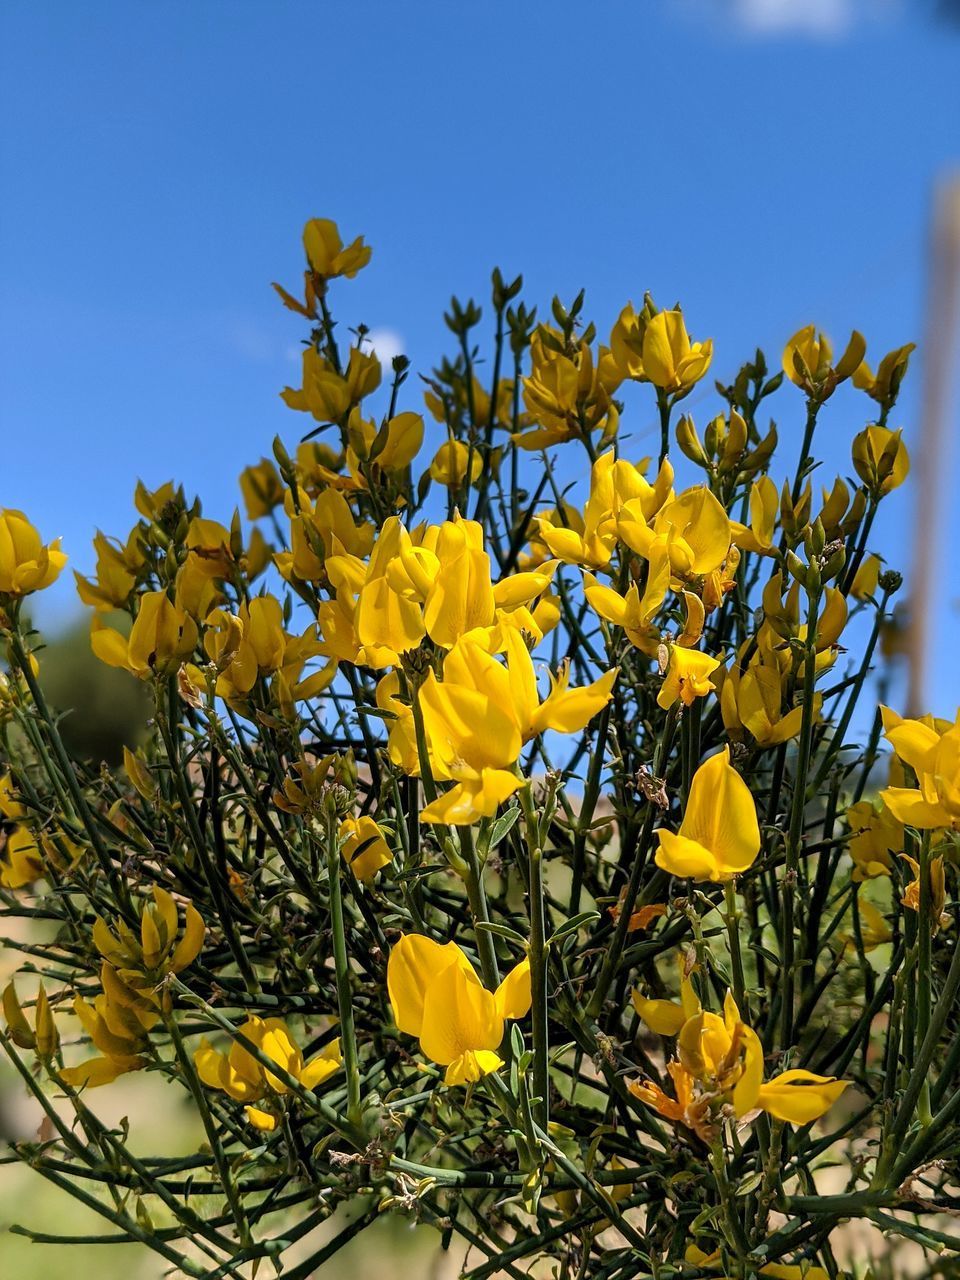 CLOSE-UP OF YELLOW FLOWERING PLANT